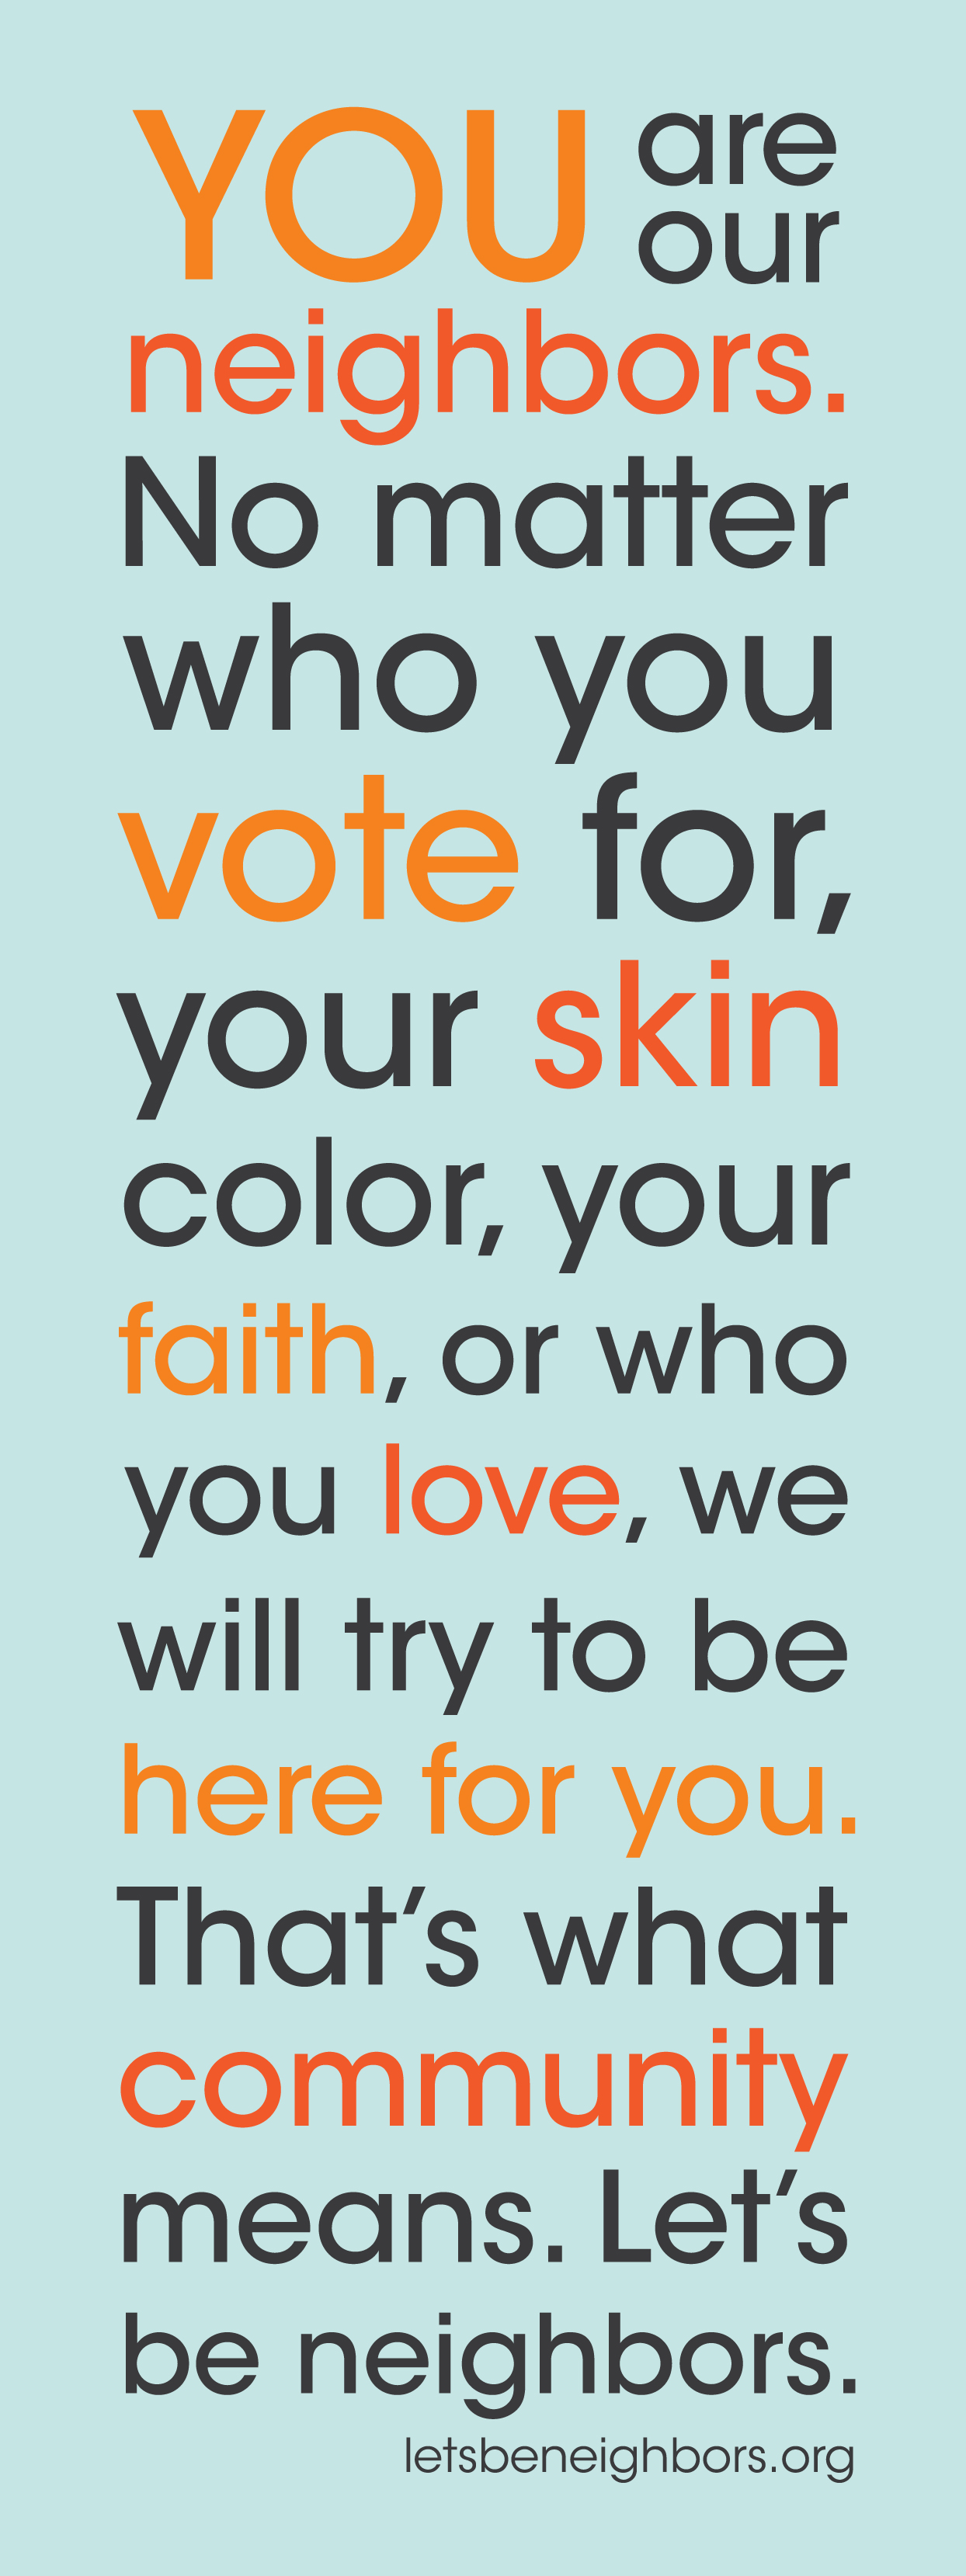 downloadable sign art, reading "You are our neighbors. No matter who you vote for, your skin color, your faith, or who you love, we will try to be here for you. That's what community means. Let's be neighbors."